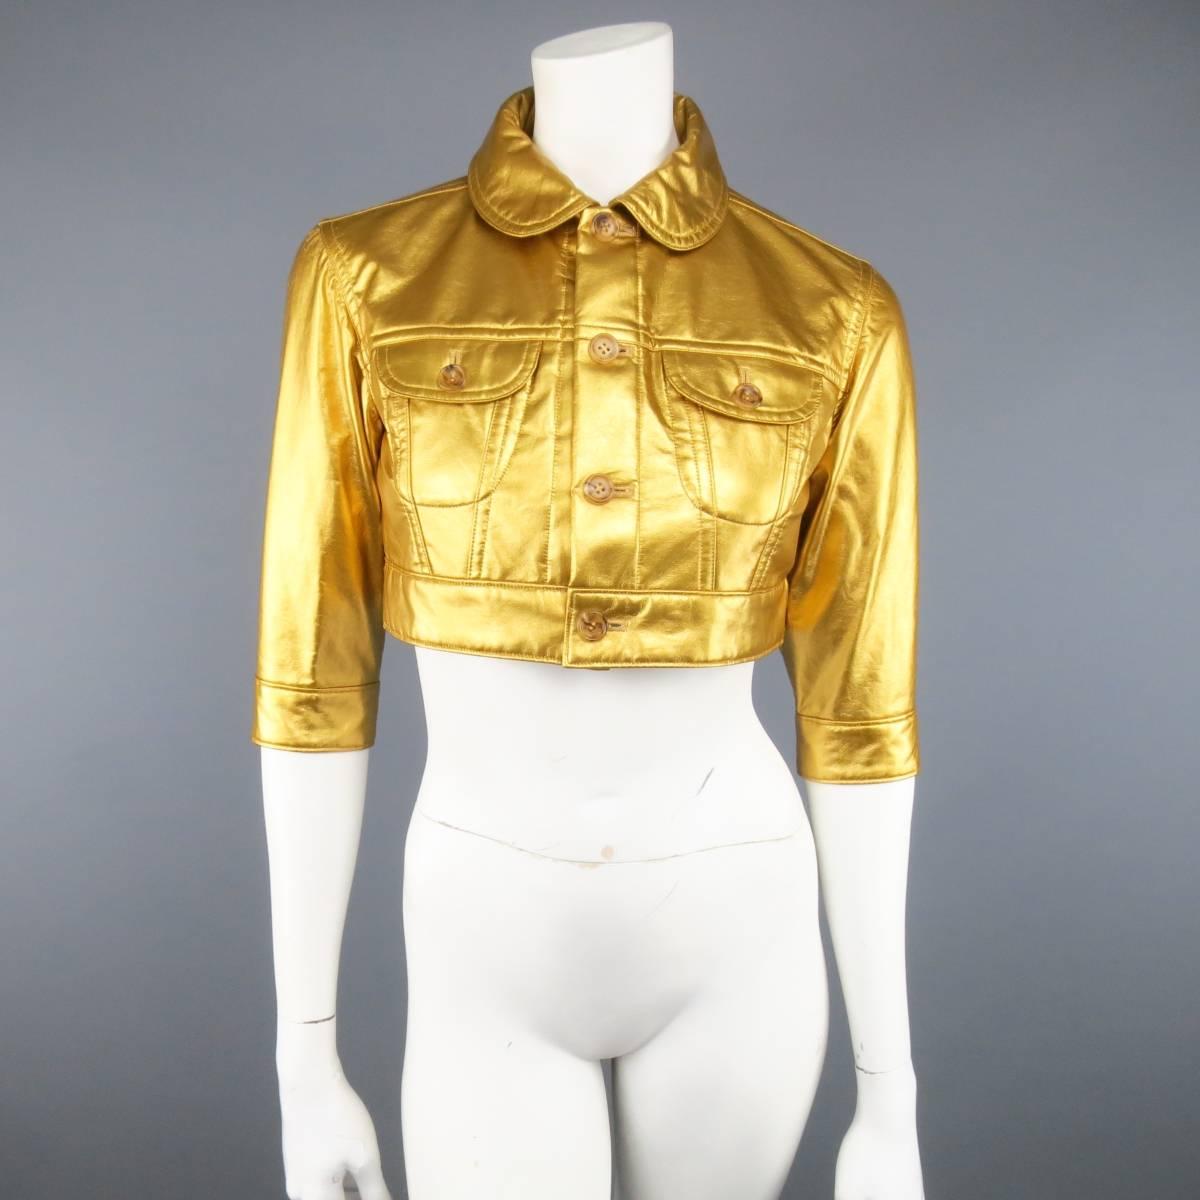 COMME DES GARCONS cropped trucker style jacket in a metallic yellow gold faux  leather featuring patch flap breast pockets, tortoise shell buttons, three-quarter sleeves, and round peter pan collar. Tag ripped. As-Is. Circa 2007. Made in Japan.
